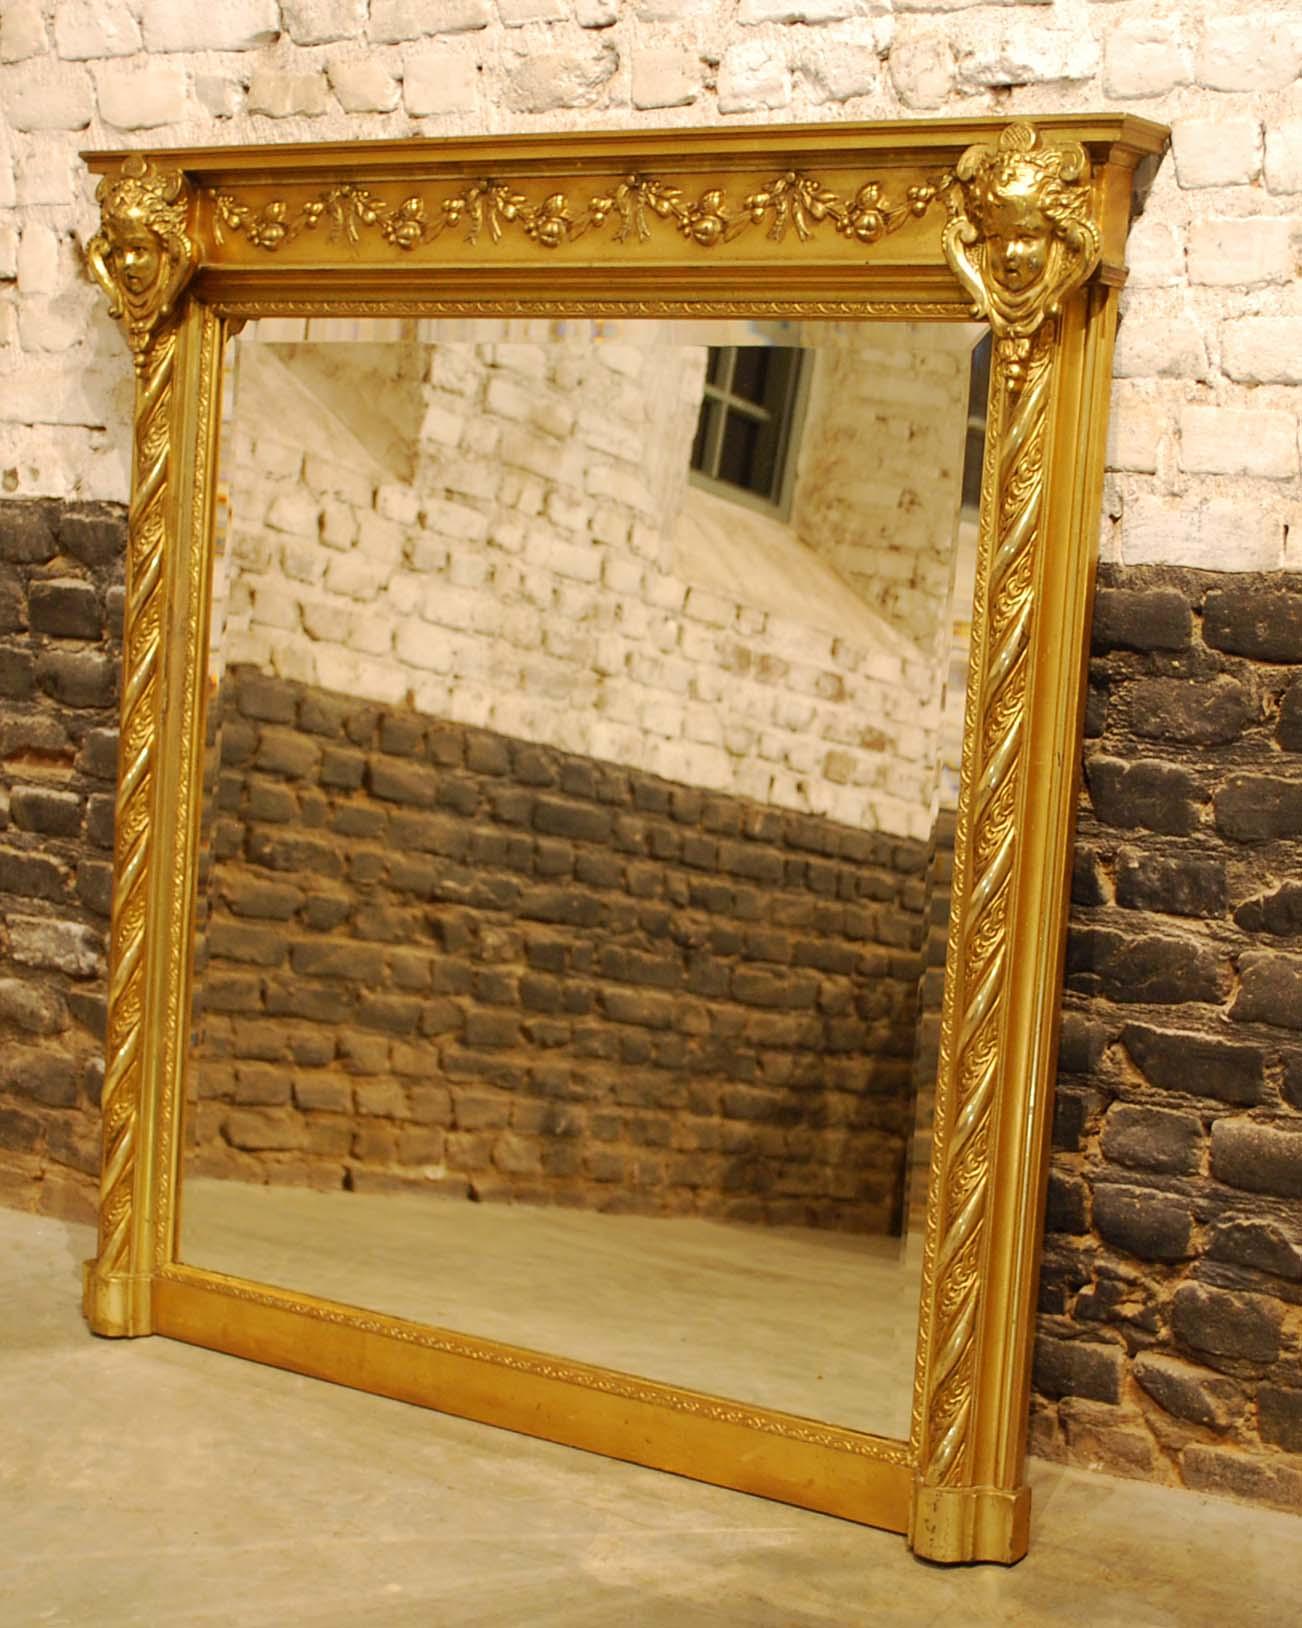 This is a beautiful antique French rectangular overmantle mirror that was made in Northern France, circa 1890. The piece has two bold gadrooned pillars with a frieze above decorated with garlands and tied ribbons flanked by cherub heads. The mirror